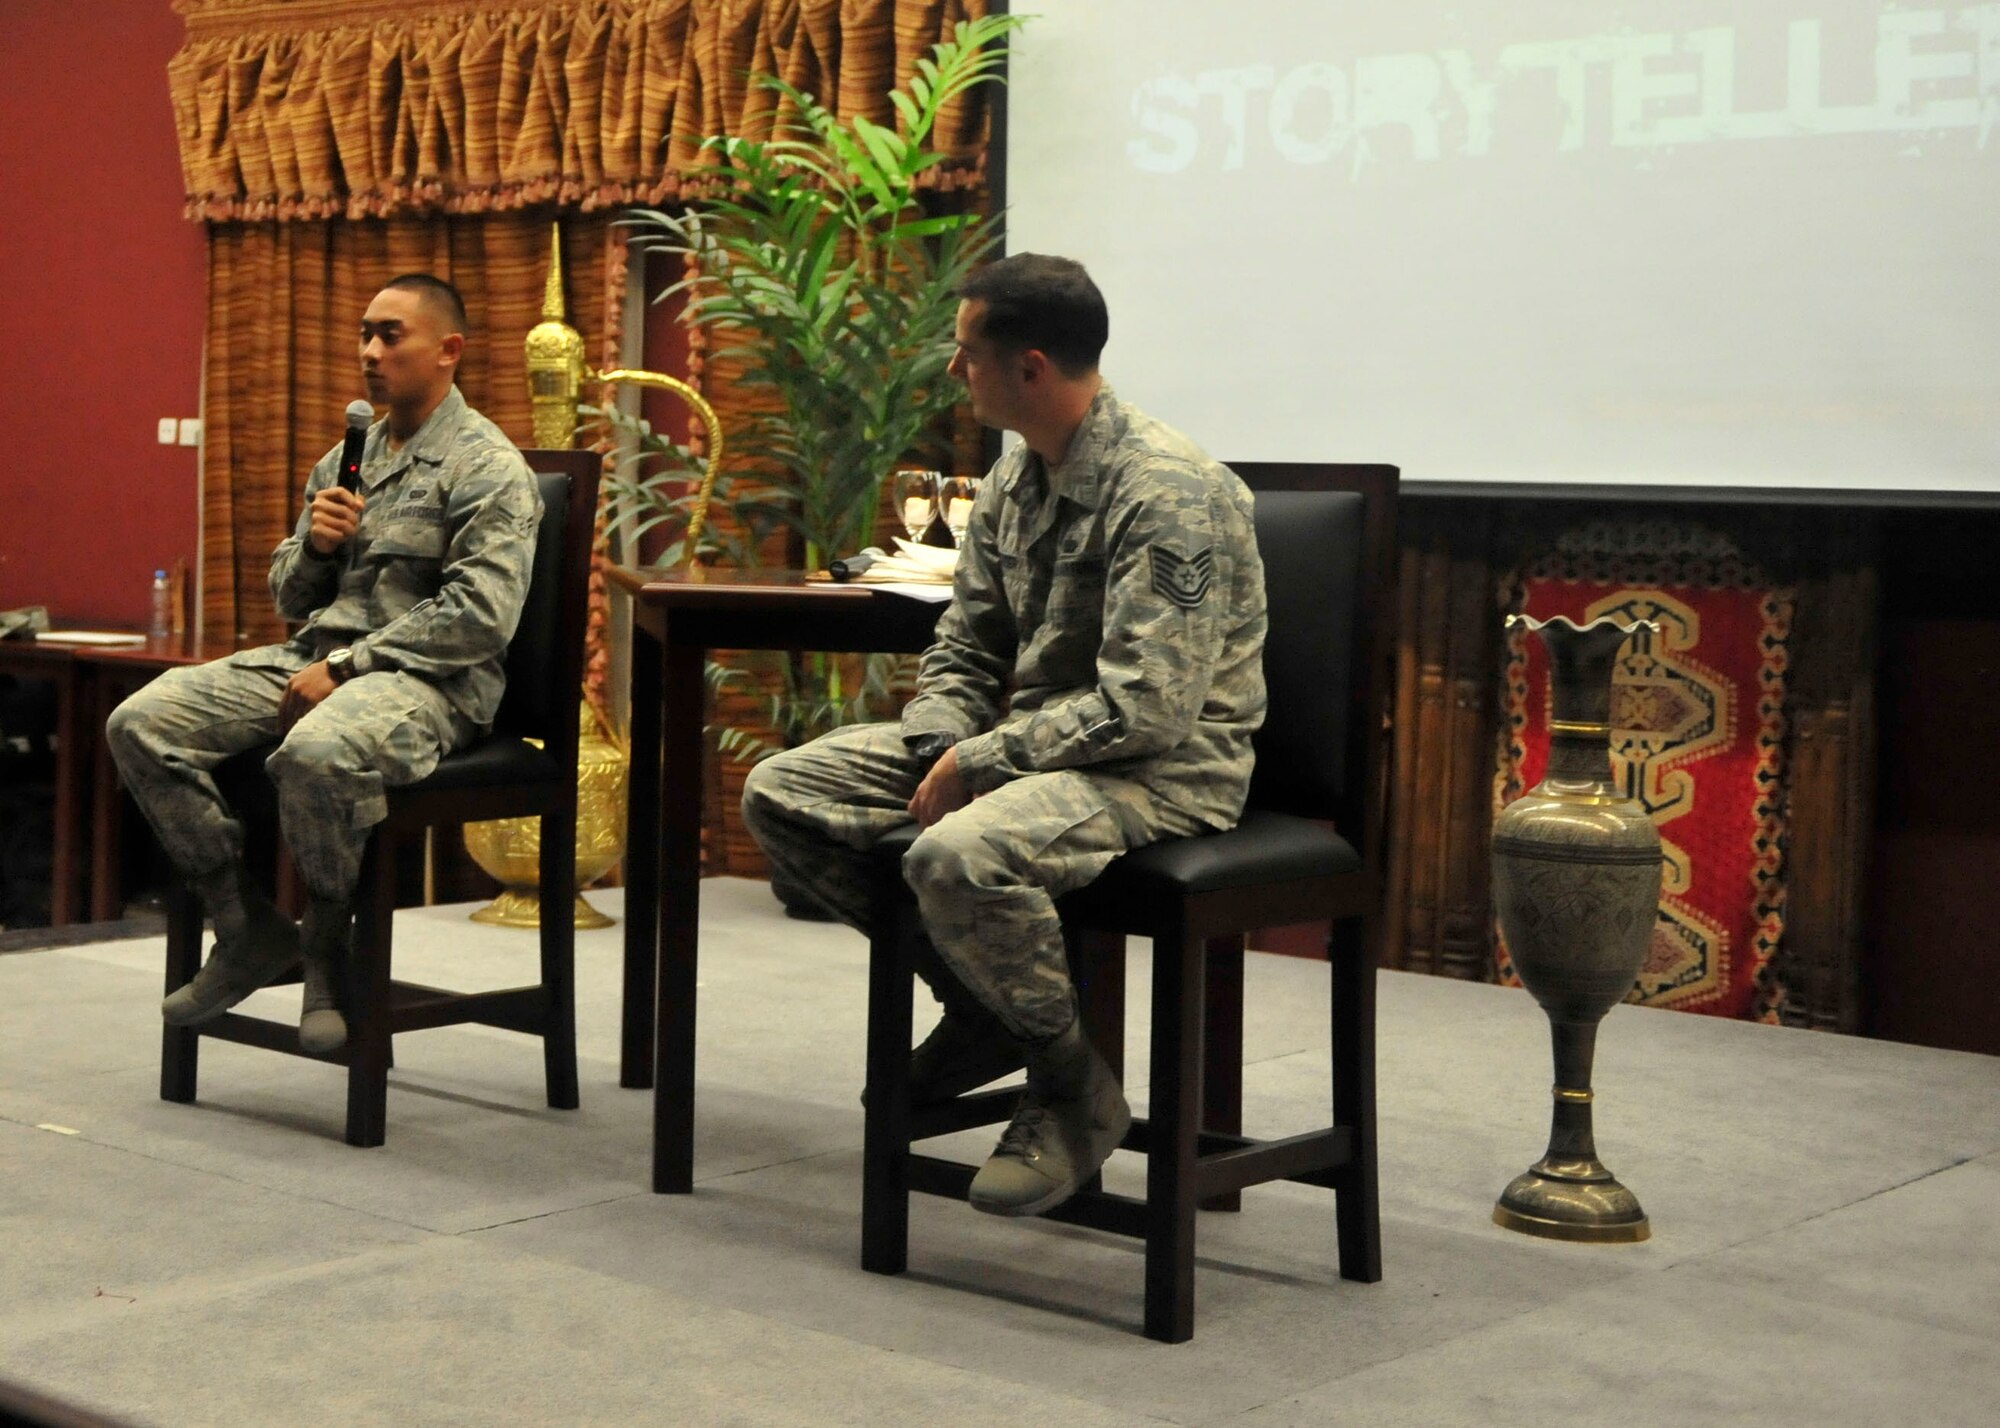 U.S. Air Force Tech. Sgt. James Sanders, 609th Combined Air Operations Center noncommissioned officer in-charge of day shift targets and Airman 1st Class Zachary, 340th Expeditionary Air Refueling Squadron intelligence journeyman, speak during a Storytellers event at Al Udeid Air Base, Qatar, Oct. 4, 2014. Zachary was one of four participants in Storytellers, an event created to provide a forum where Airmen can share experiences and learn about one another, promoting understanding throughout the Air Force. (U.S. Air Force photo by Senior Airman Colin Cates)